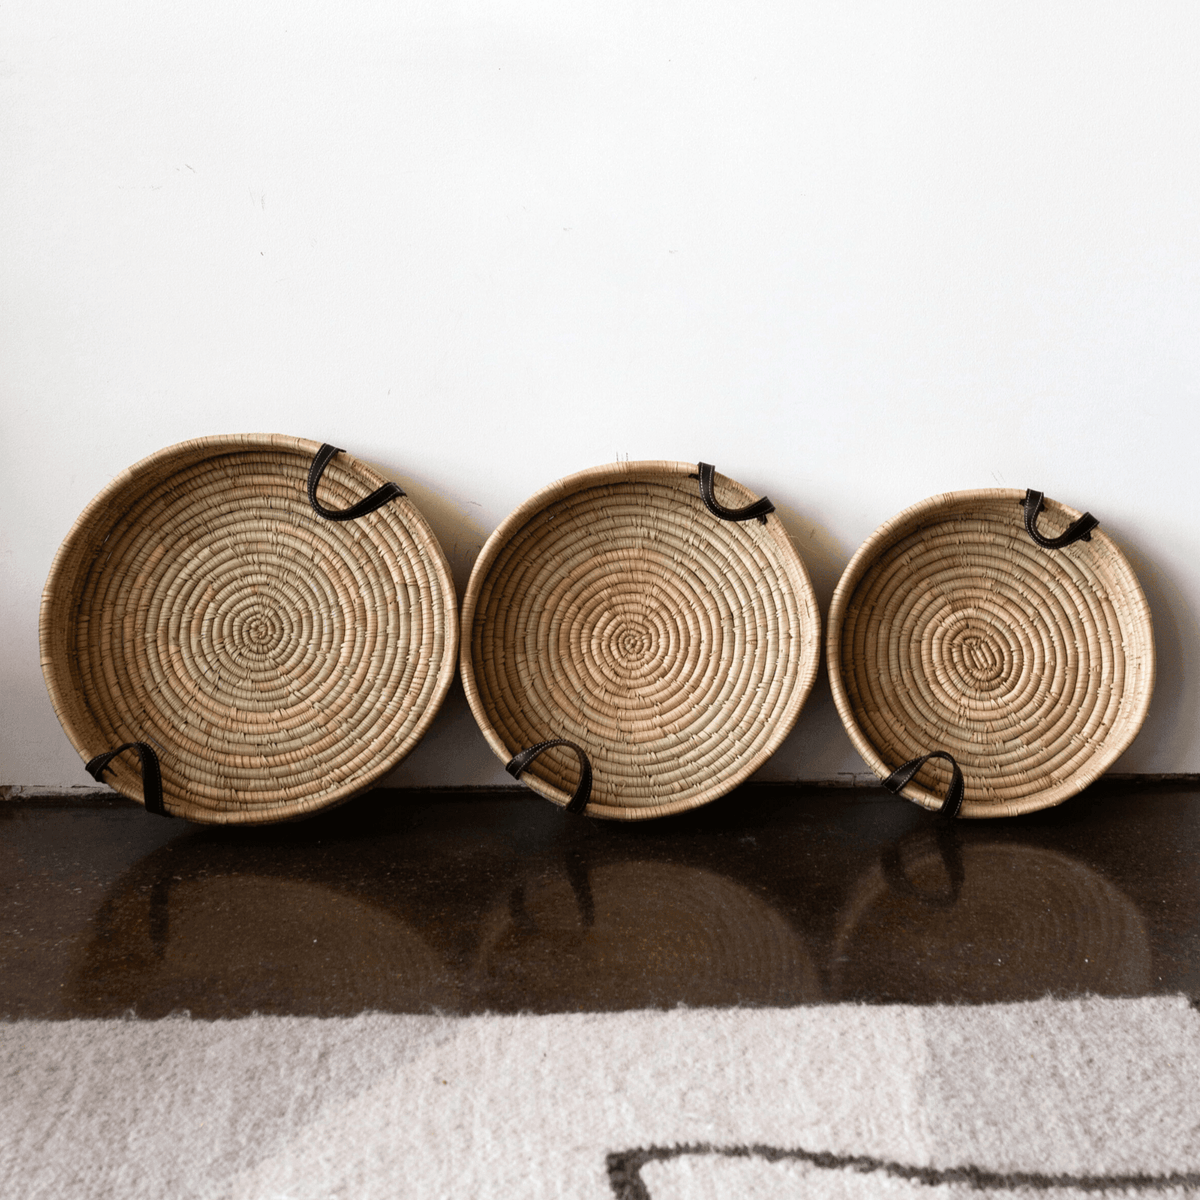 Betty Tray kanju interiors luxury vintage chic bar entertaining tray serving accent table ottoman intricate wood leather handles multifunctional functional function durable indoor outdoor handwoven basket ilala palm natural cocoa black toffee coiled organic centerpiece bowl wall decor shelf decor decorative accent hand made catch-all Zimbabwe platter canape nesting nested